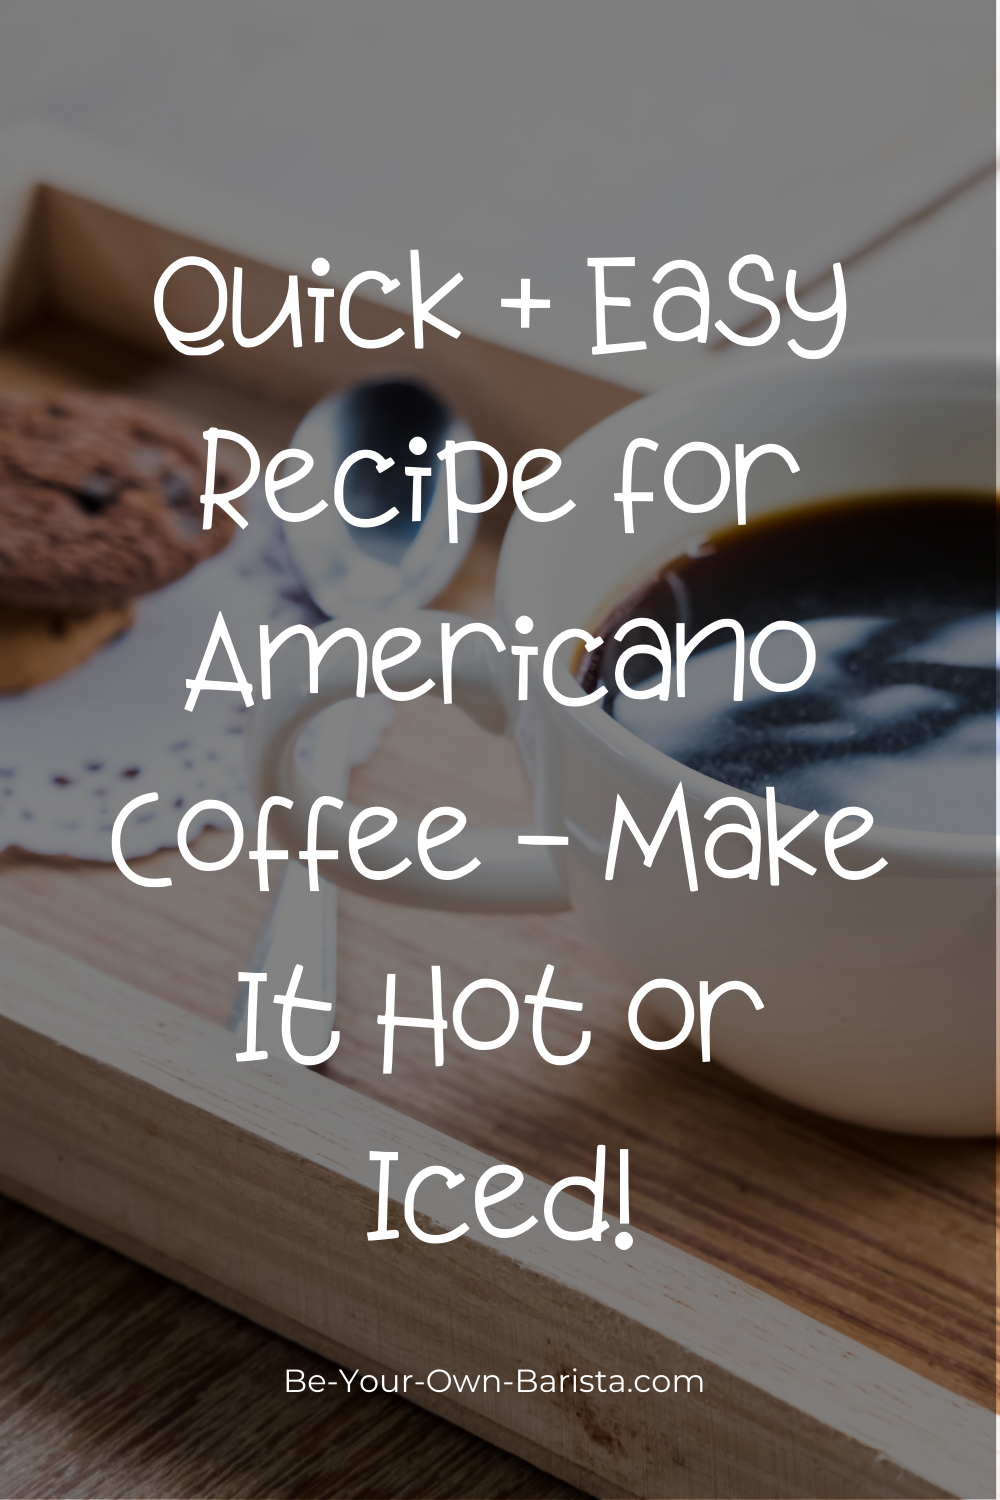 Quick + Easy Recipe for Americano Coffee - Make It Hot or Iced!